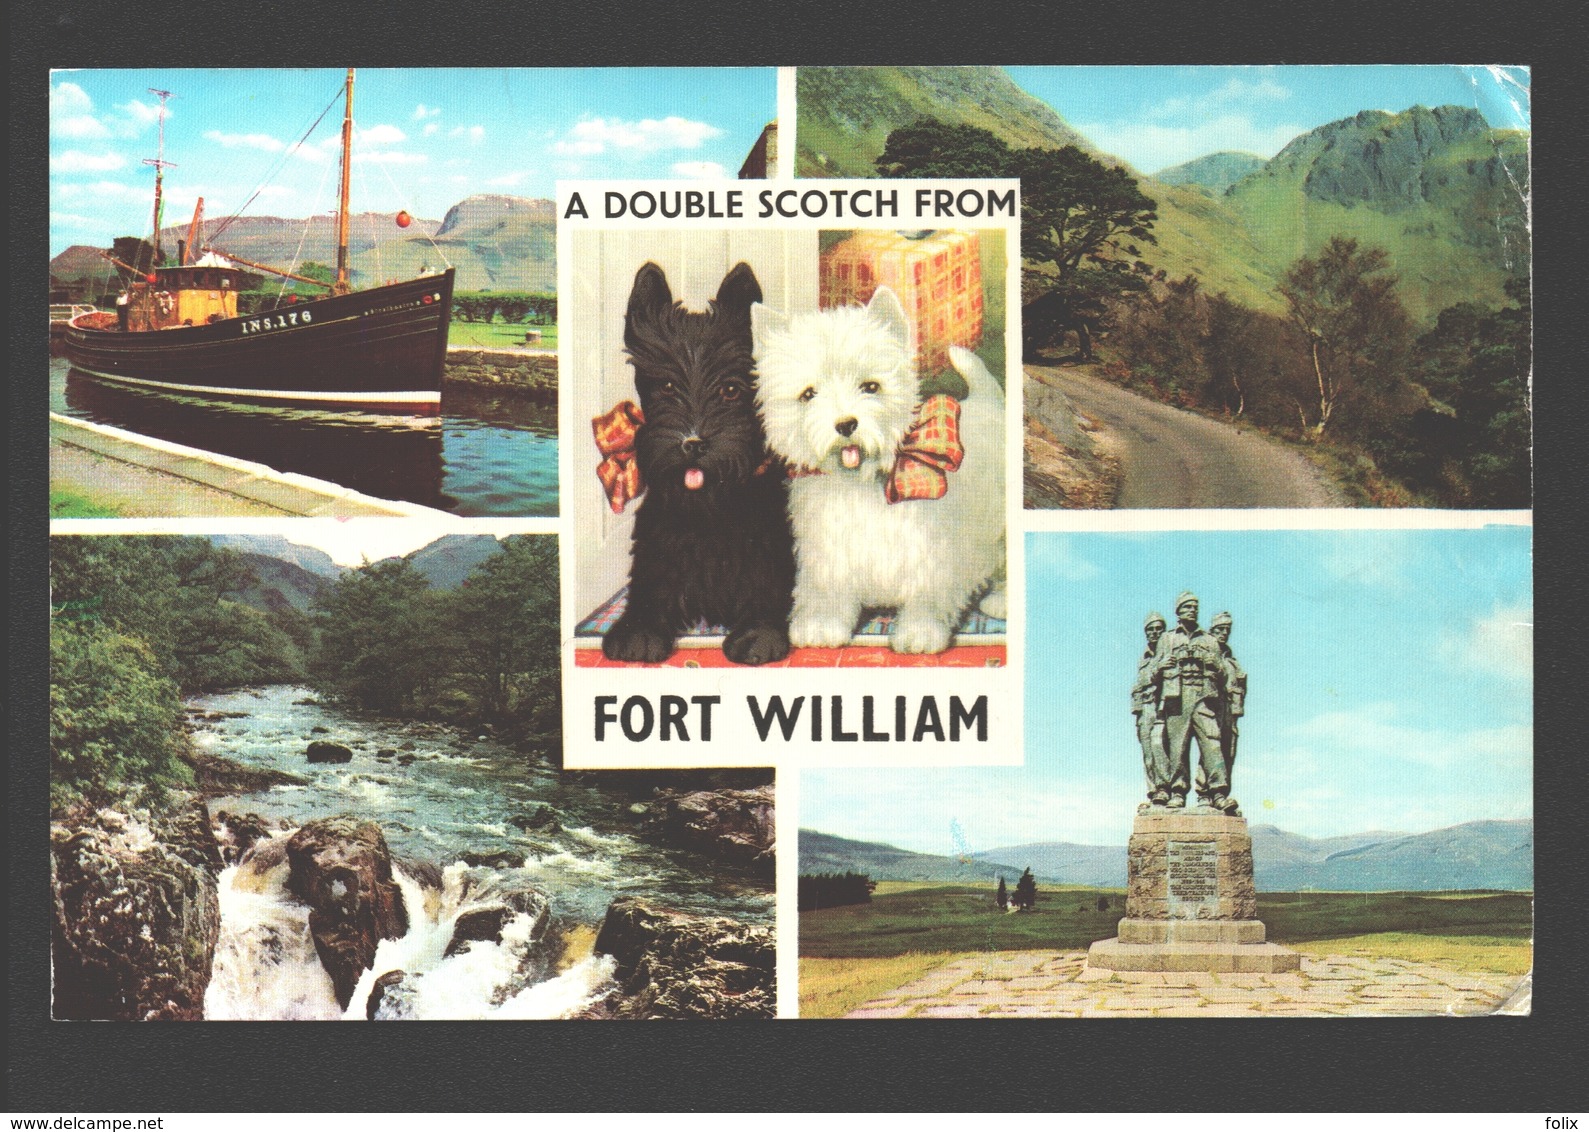 Fort William - A Double Scotch From Fort William - Multiview - Inverness-shire